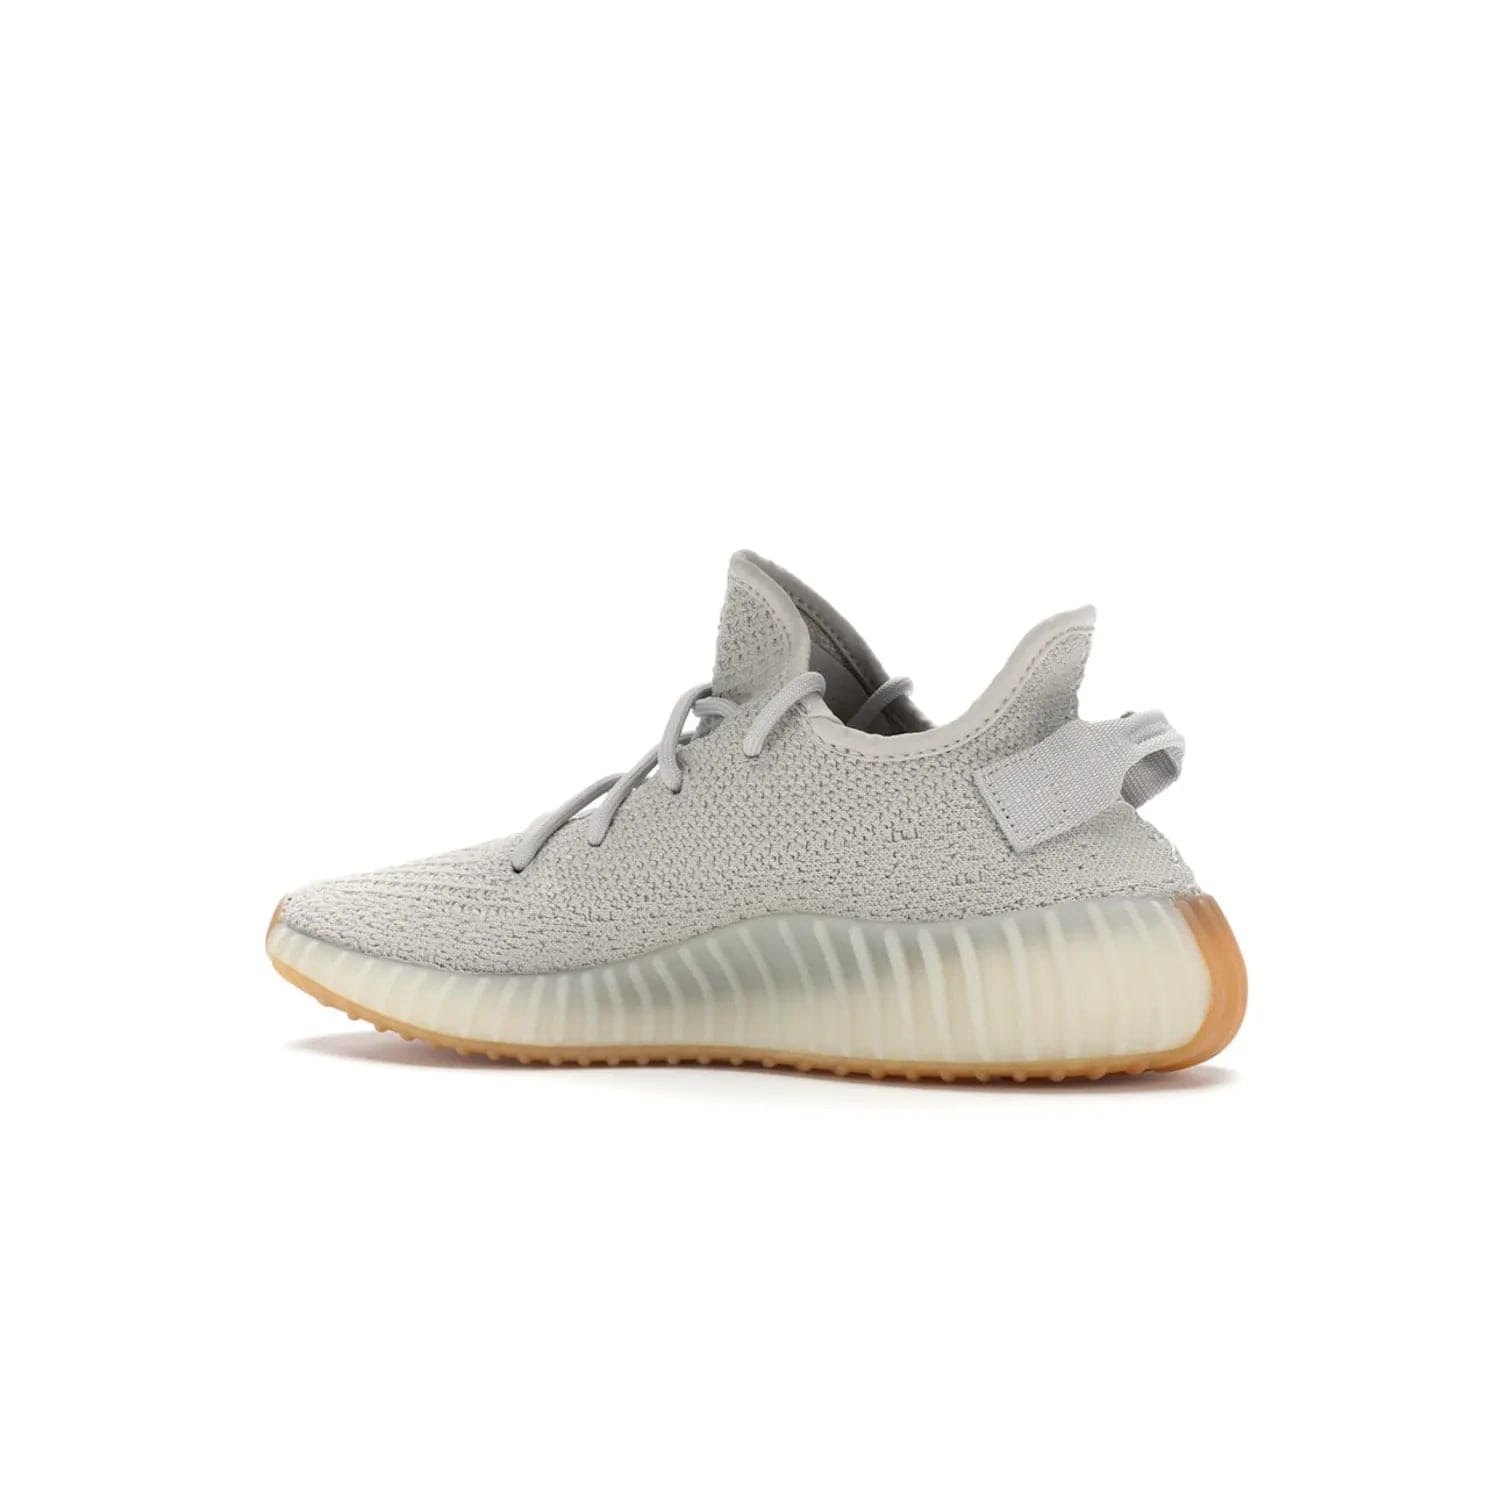 adidas Yeezy Boost 350 V2 Sesame - Image 22 - Only at www.BallersClubKickz.com - Introducing the adidas Yeezy Boost 350 V2 Sesame. Featuring a sesame upper, midsole and gum sole for a sleek silhouette. Cop the stylish sneaker released in November 2018.